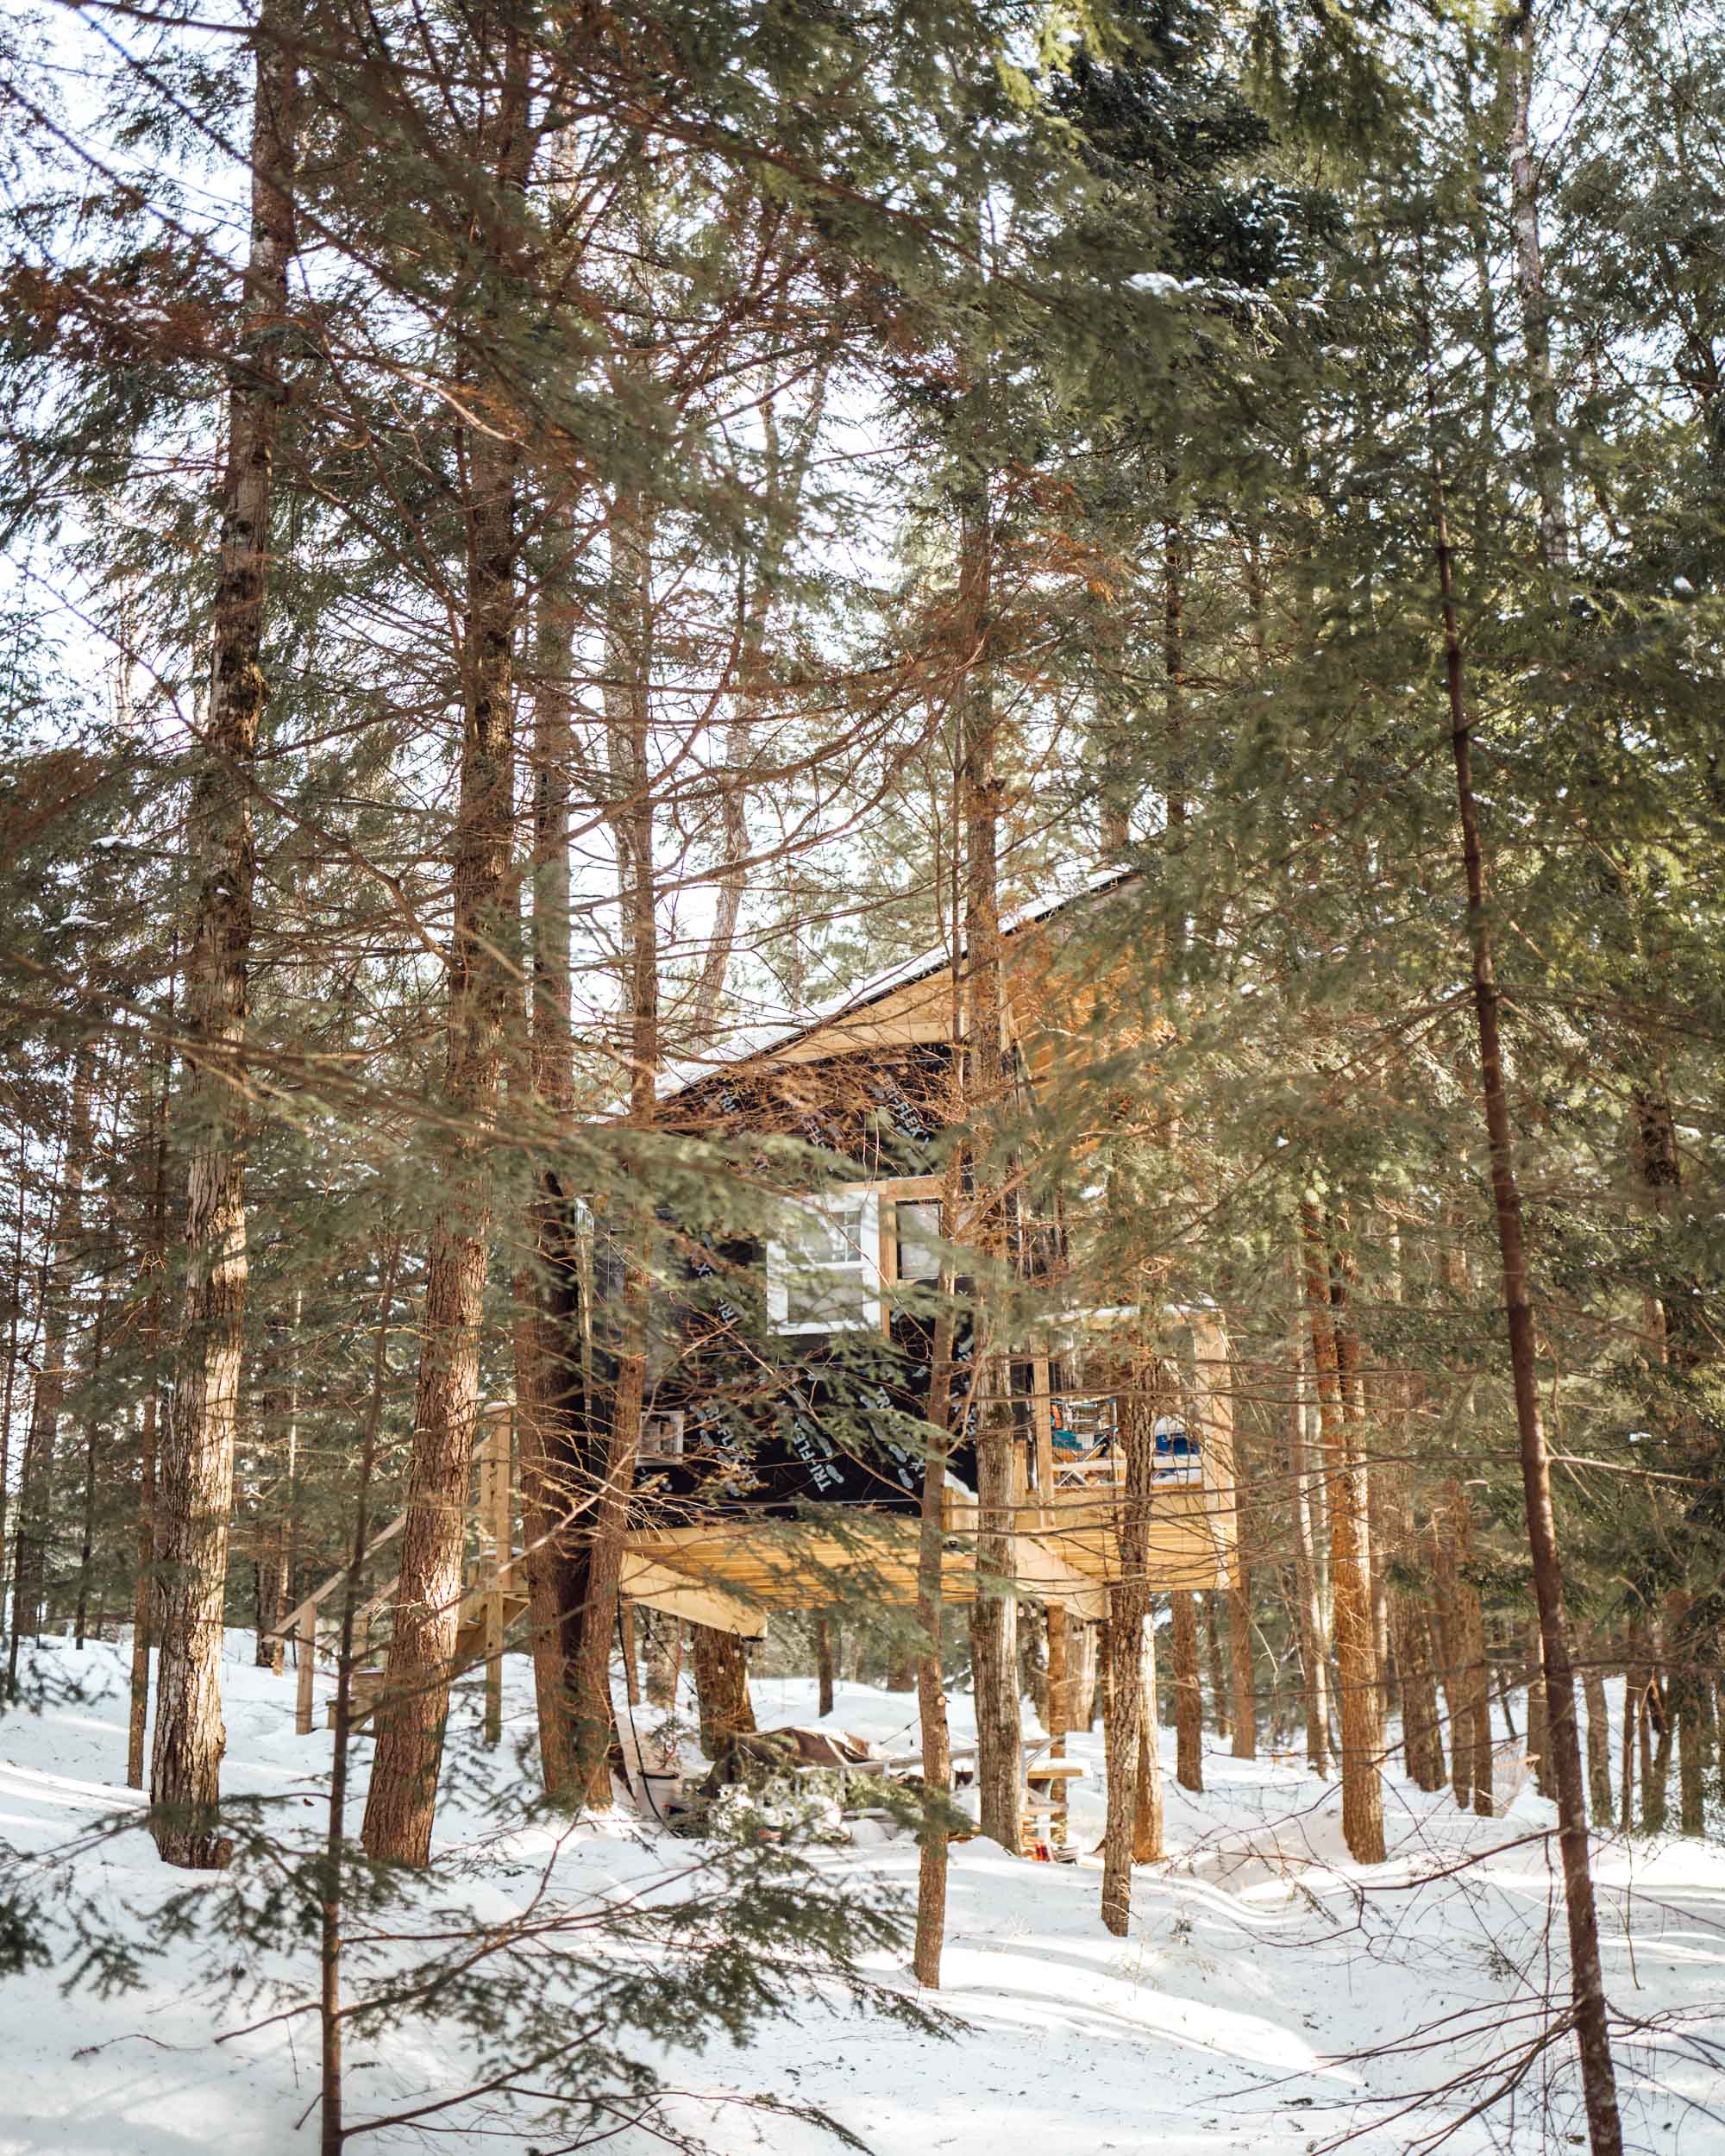 Vermont Treehouse Airbnb in the trees in winter via Find Us Lost